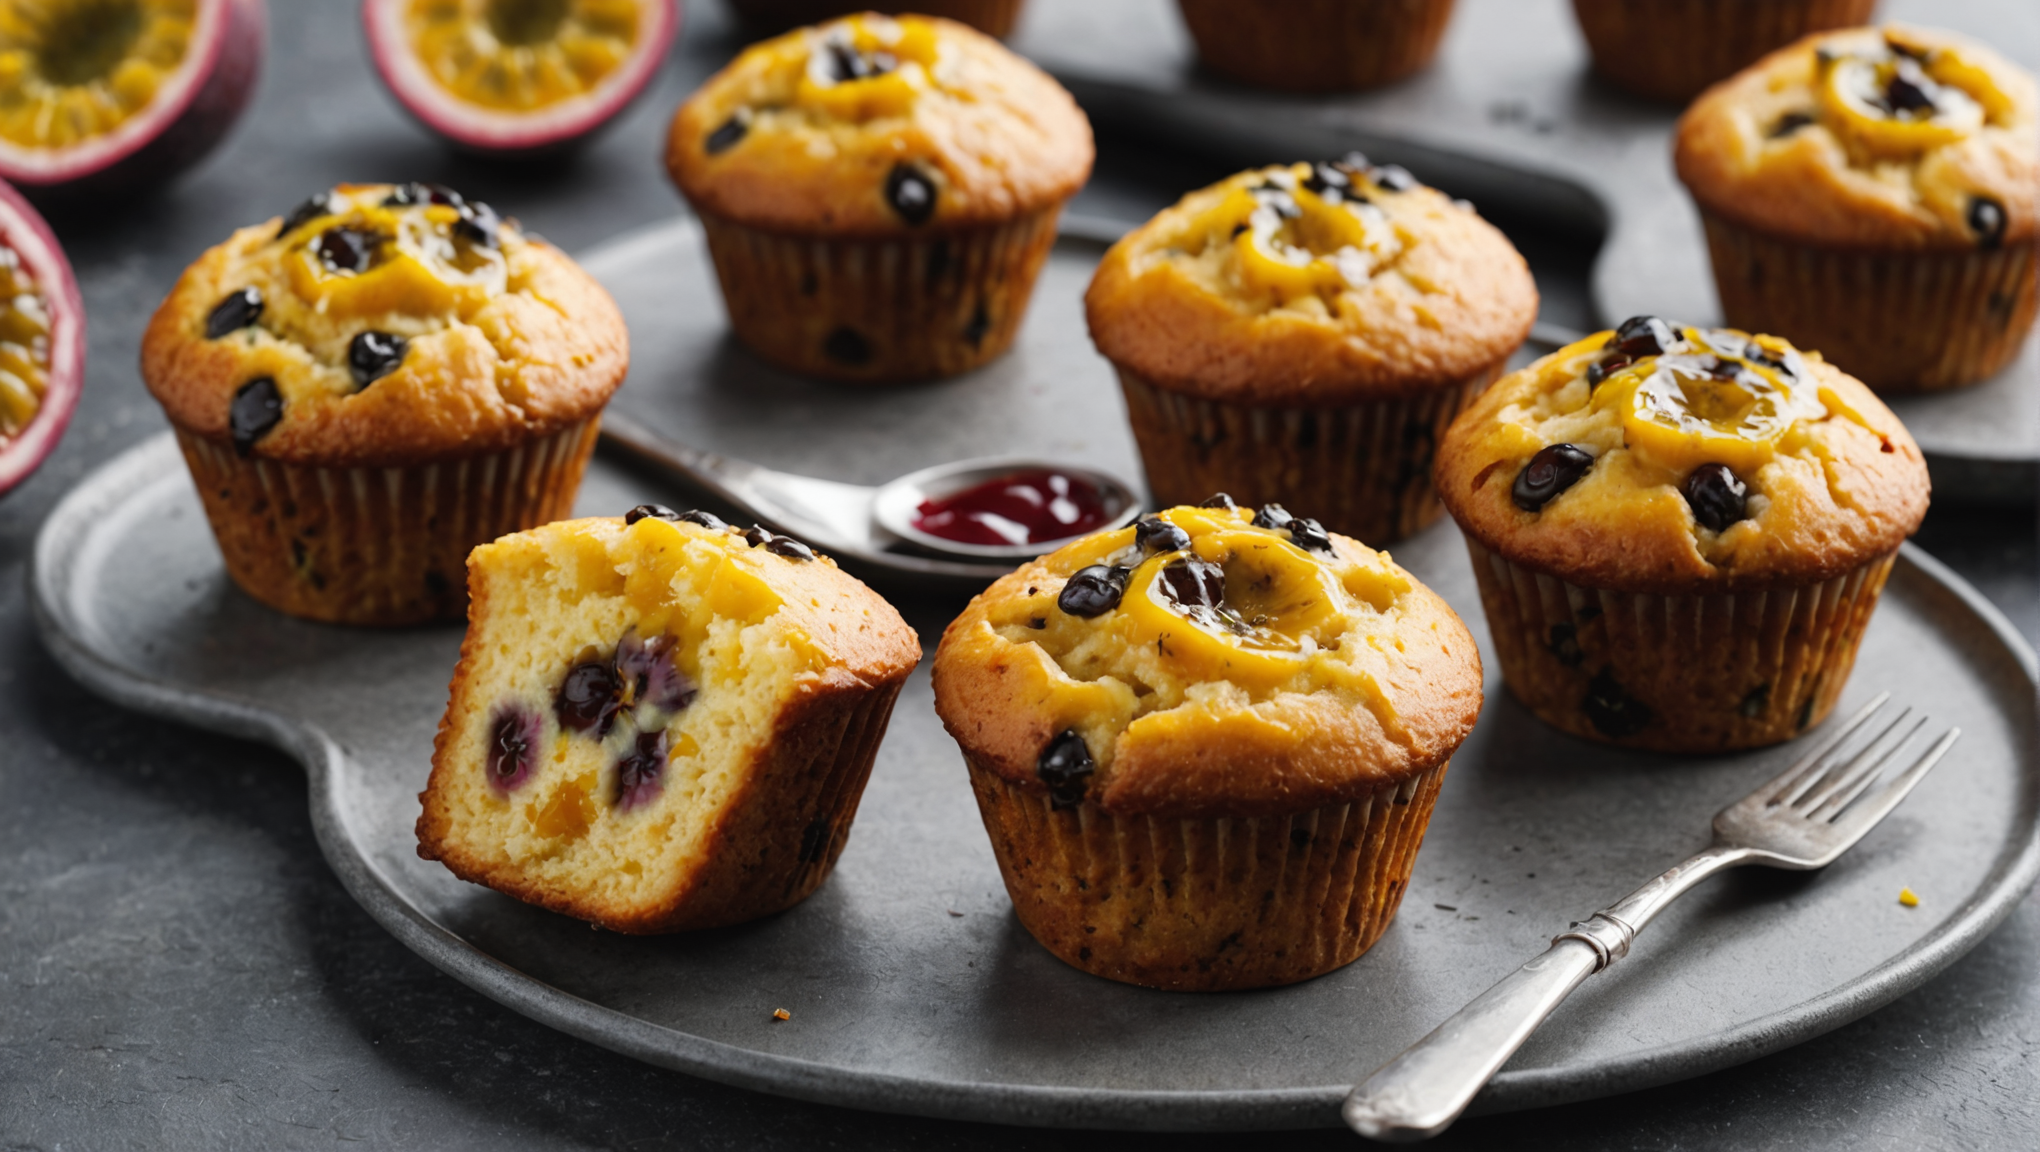 Freshly baked Passionfruit Muffins